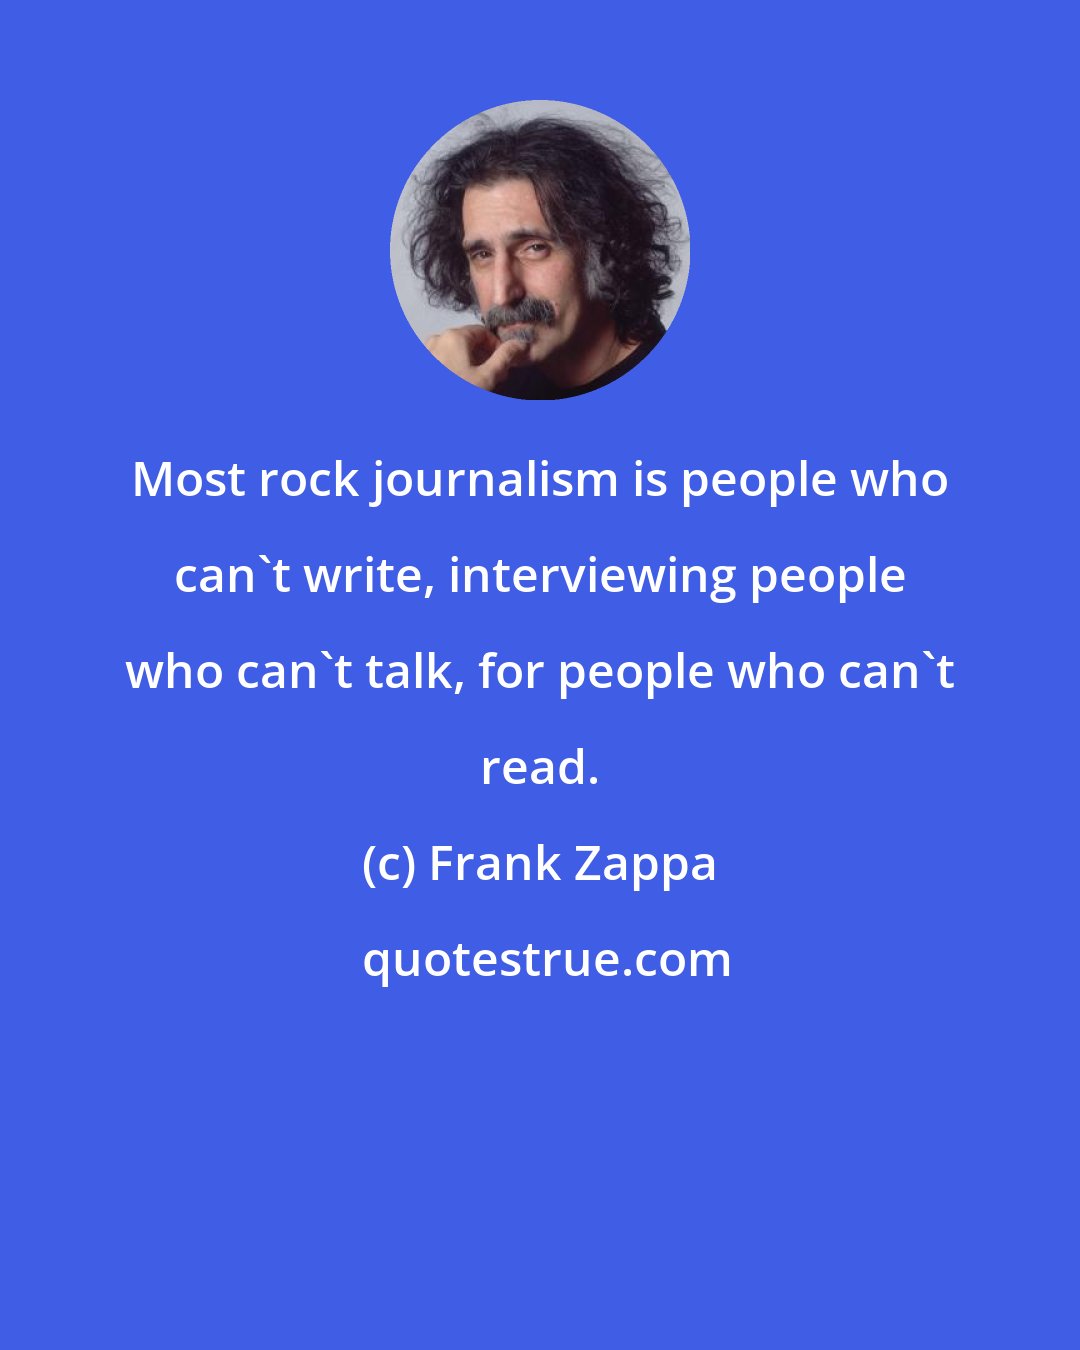 Frank Zappa: Most rock journalism is people who can't write, interviewing people who can't talk, for people who can't read.